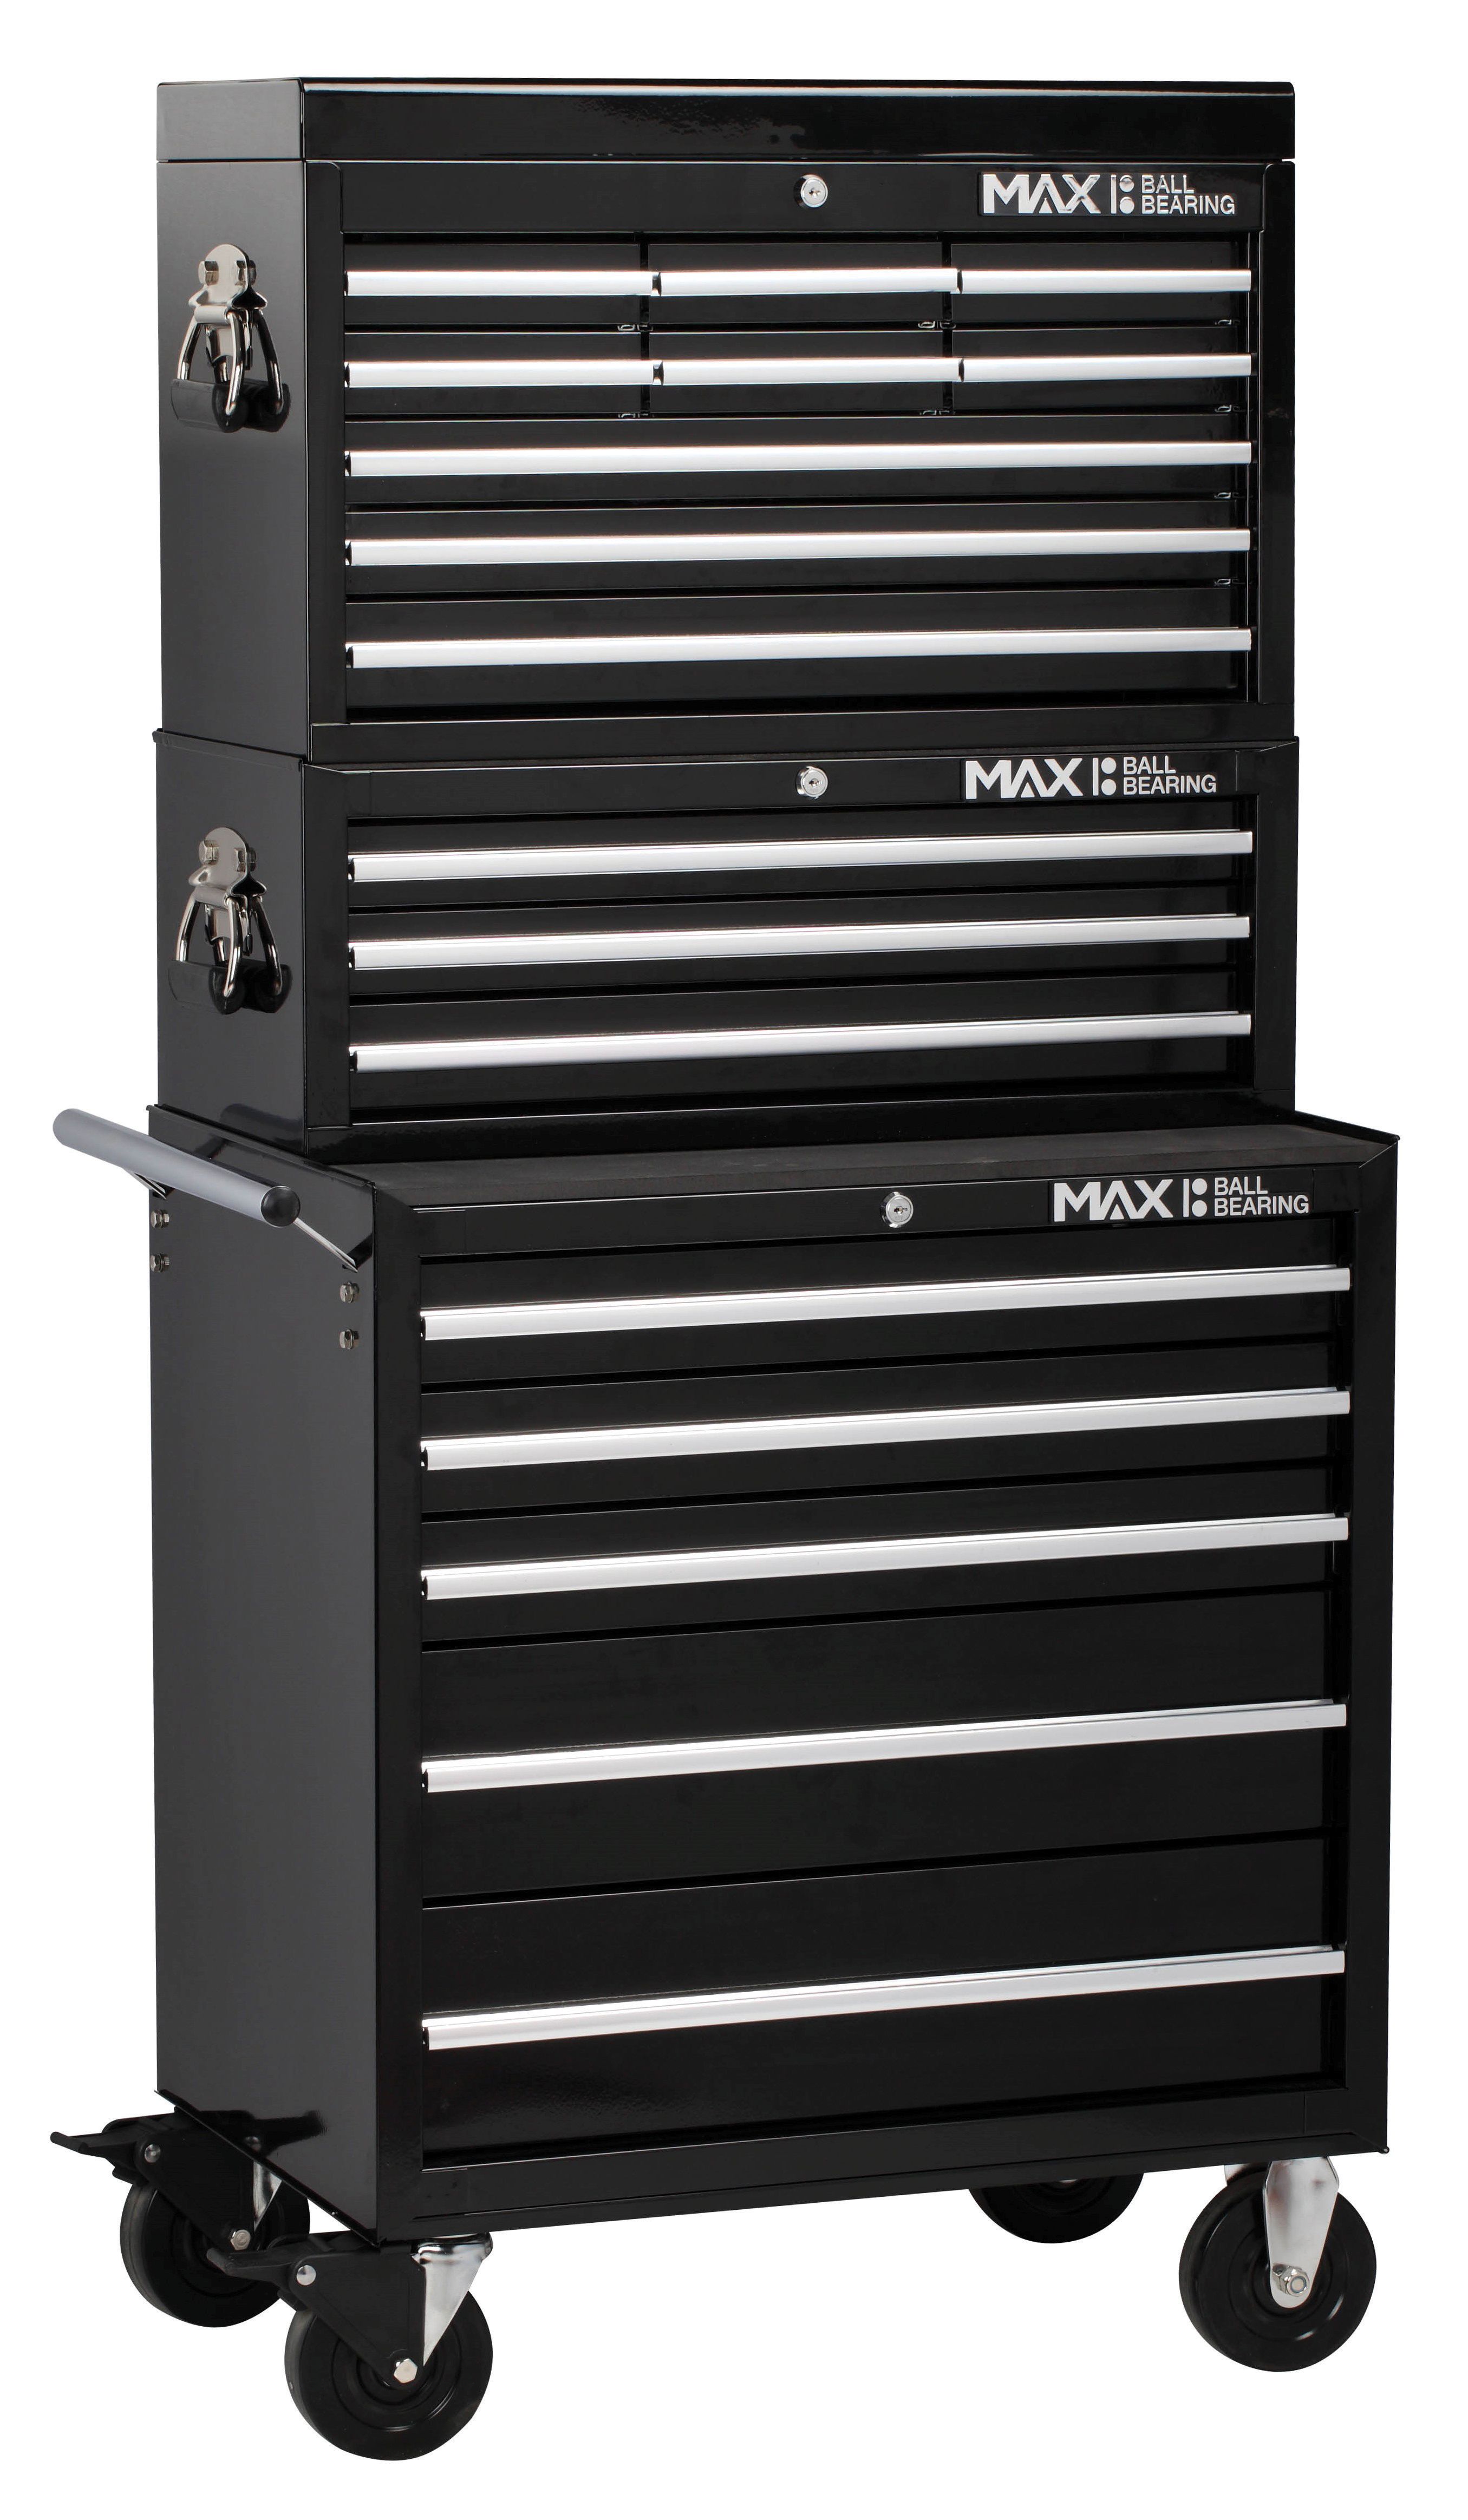 Image of Hilka Professional 17 Drawer Tool Chest and Trolley Combination Unit - Black